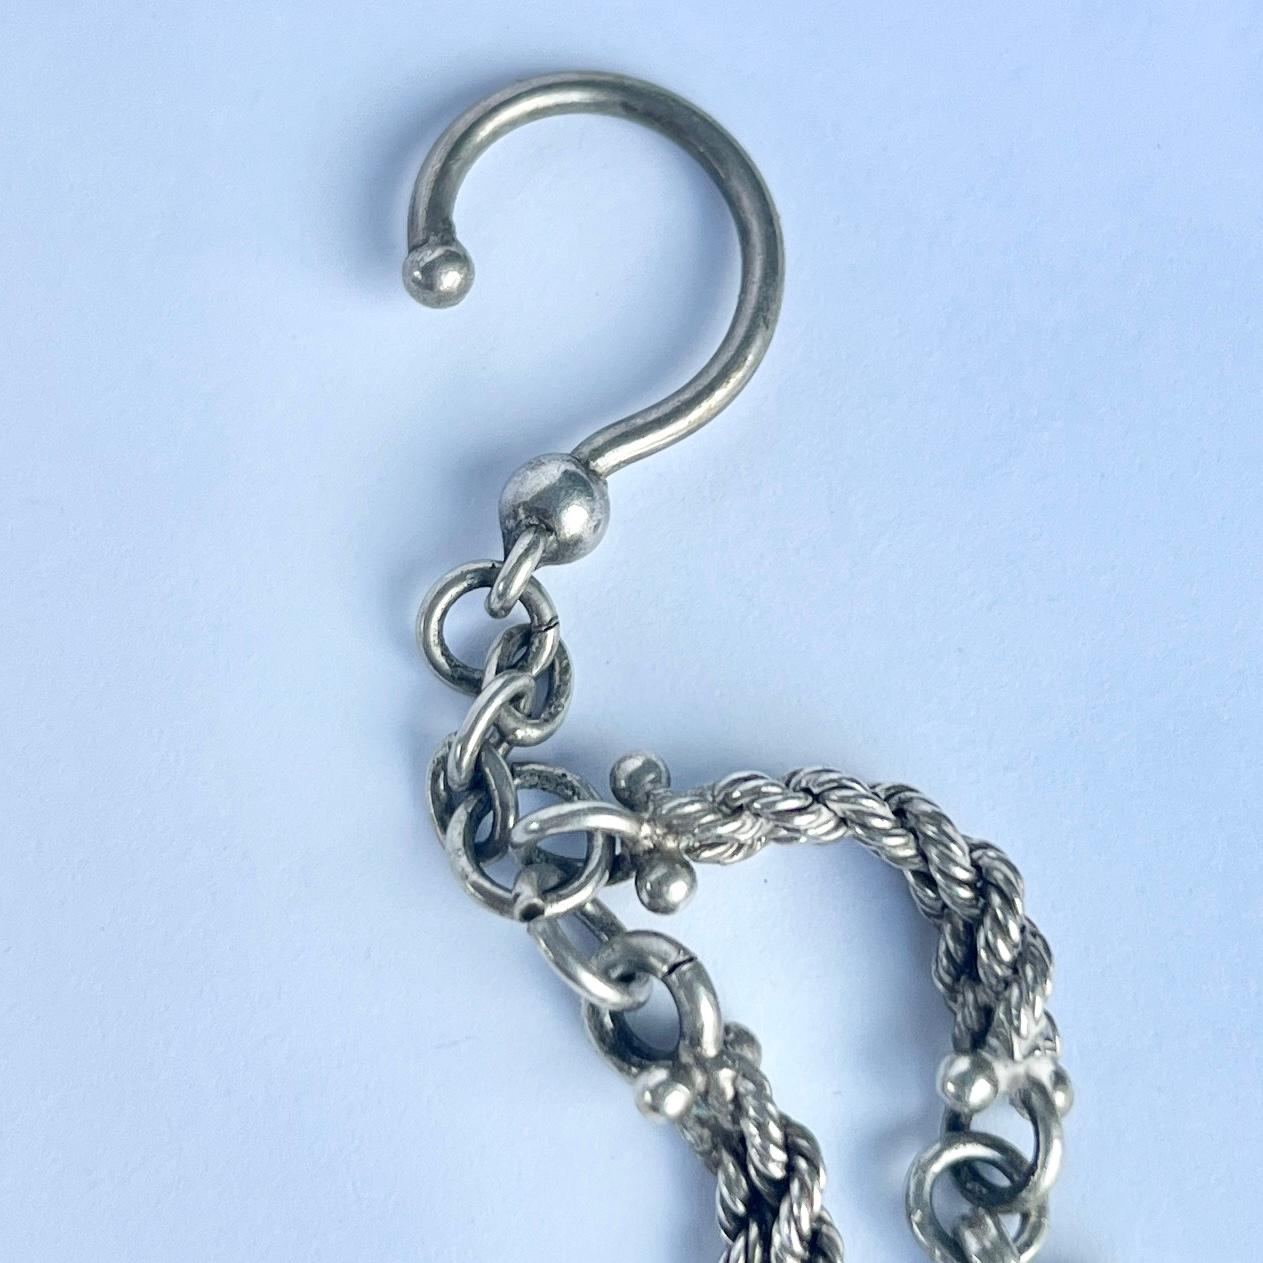 An Albert chain is an essential in any gents wardrobe. This particular Albert  is made up of chunky top twist chain. There is a dog clip at one end and it holds a hook.  

Length: 28cm (inc tassel)

Weight: 16.9g